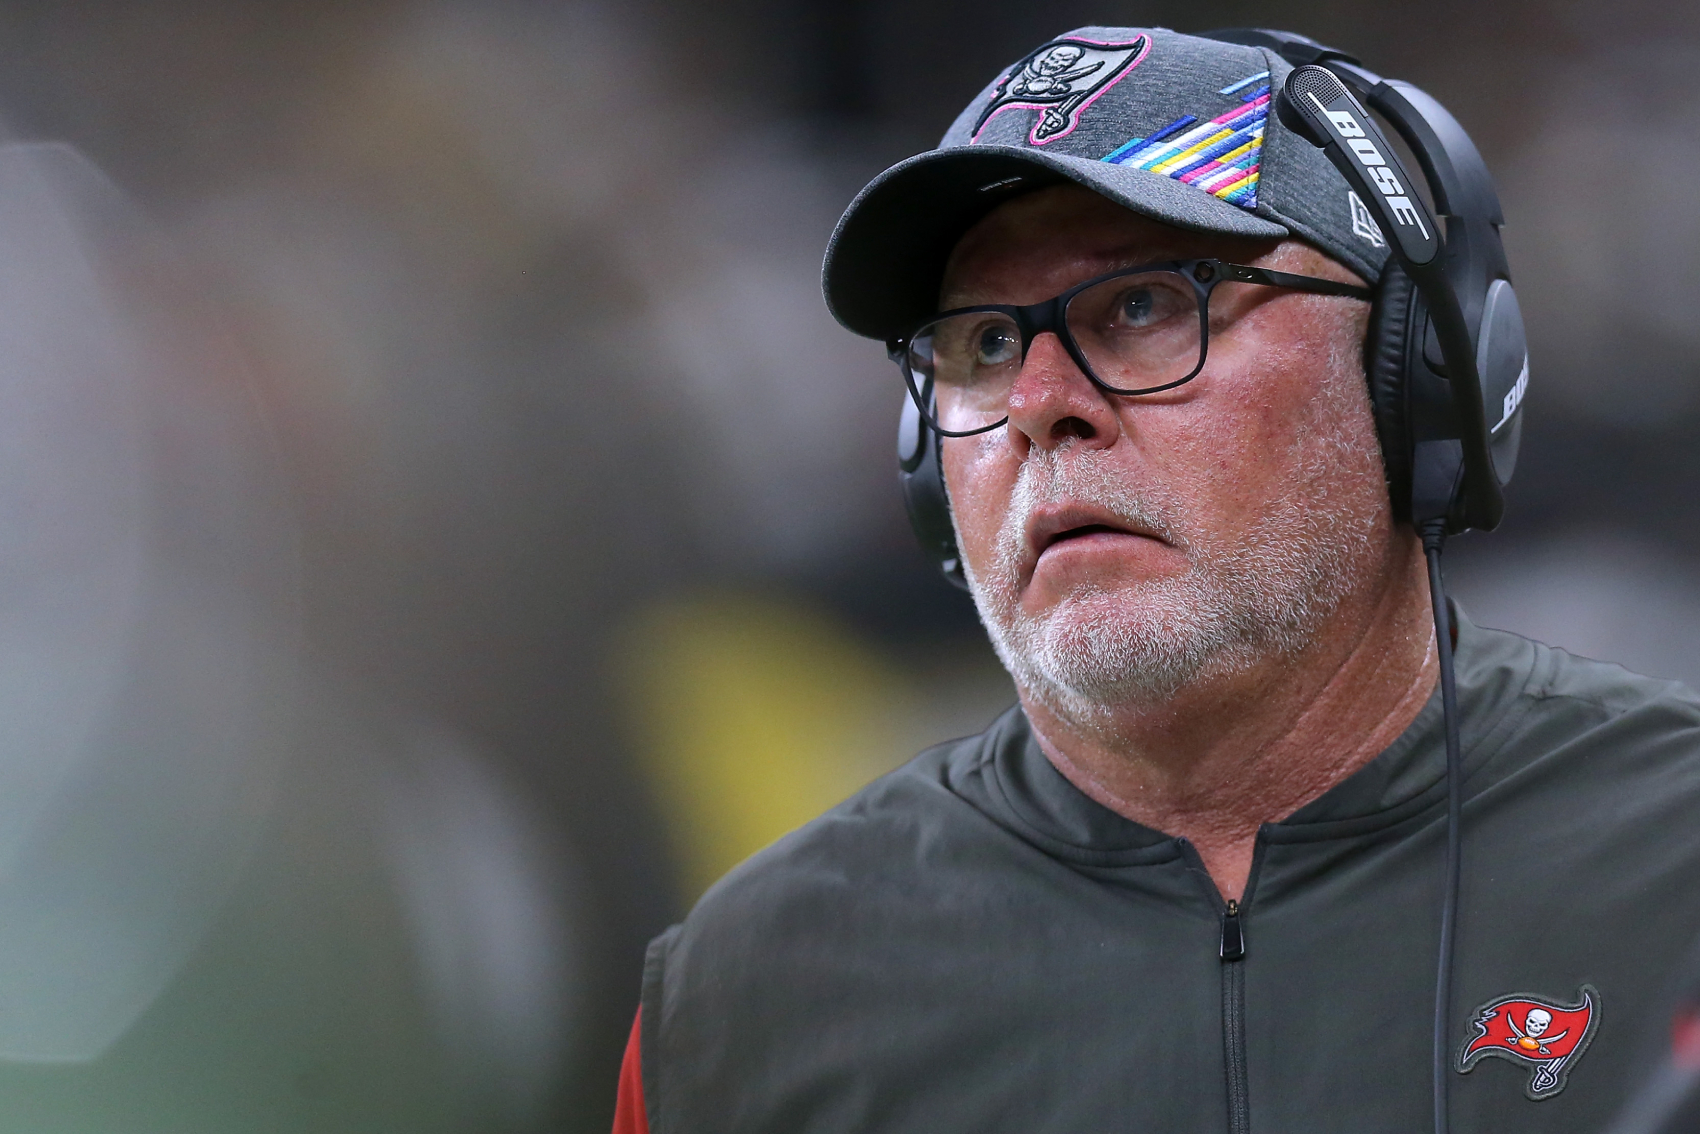 Bruce Arians has been a pretty successful coach with the Cardinals and Buccaneers. However, before his coaching days, he drank paint as a kid.